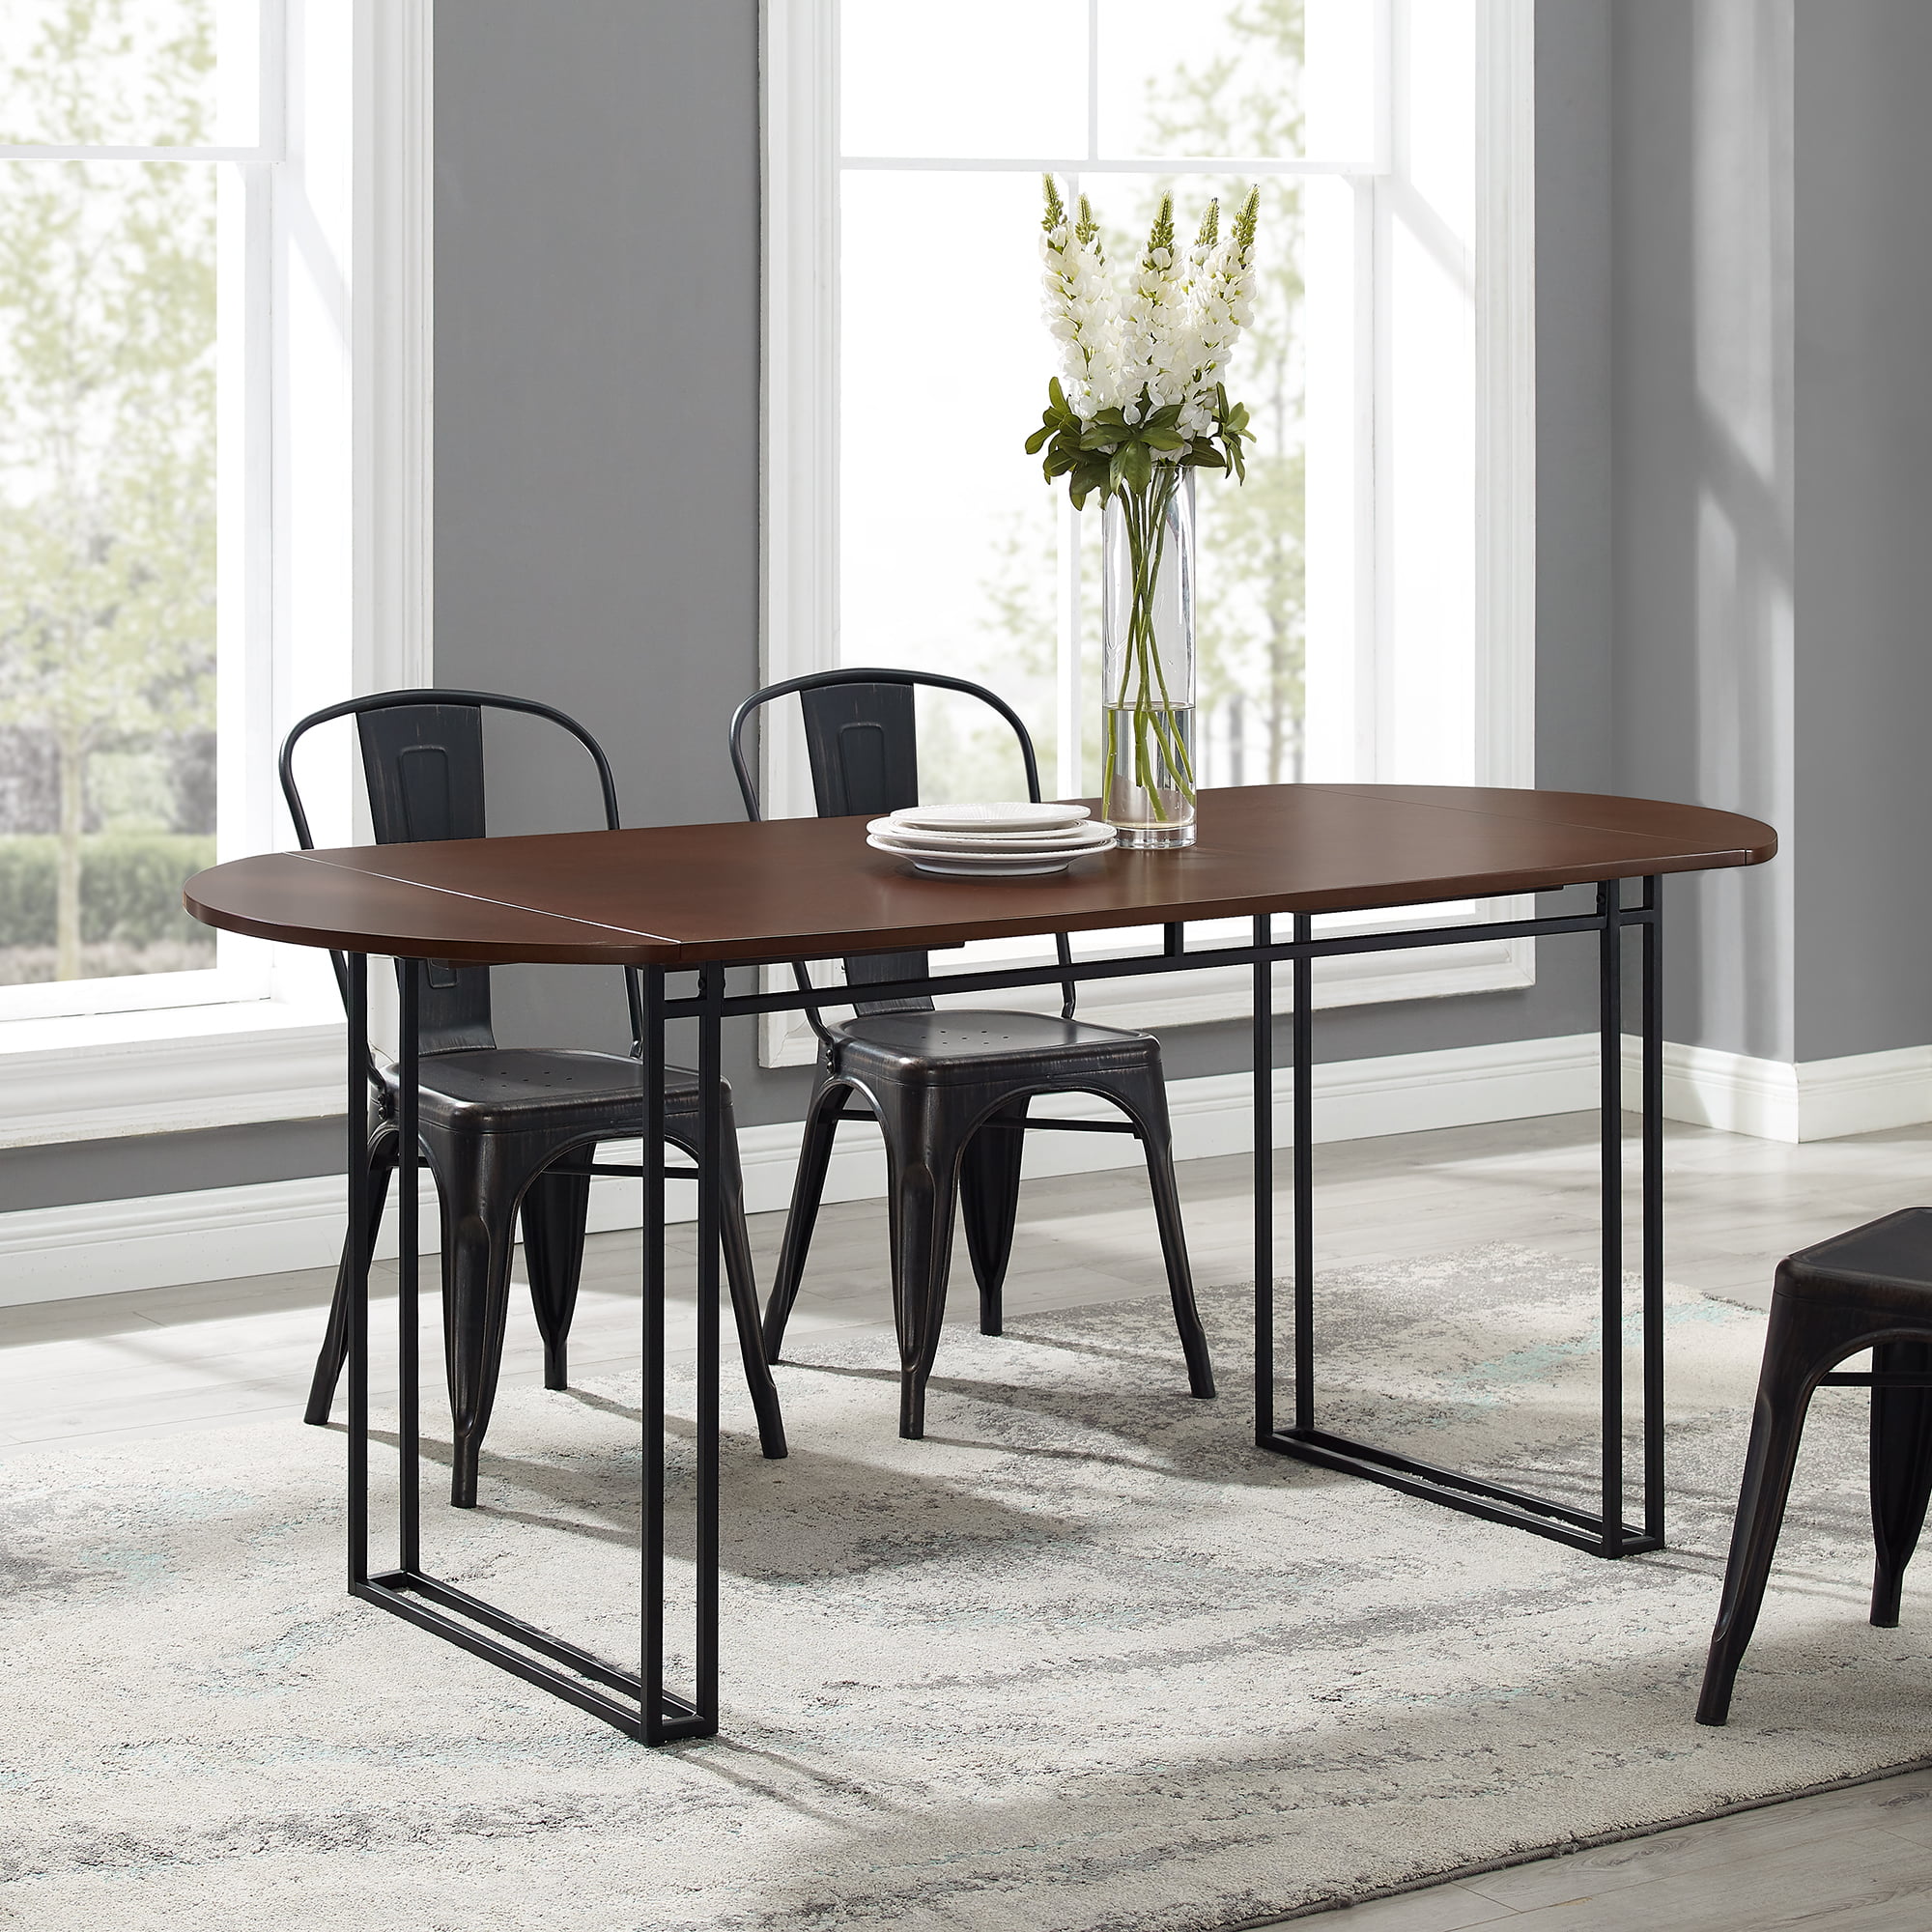 Manor Park Modern Drop Leaf Mixed Material Dining Table (Walnut/Black) for $110 + Free Shipping